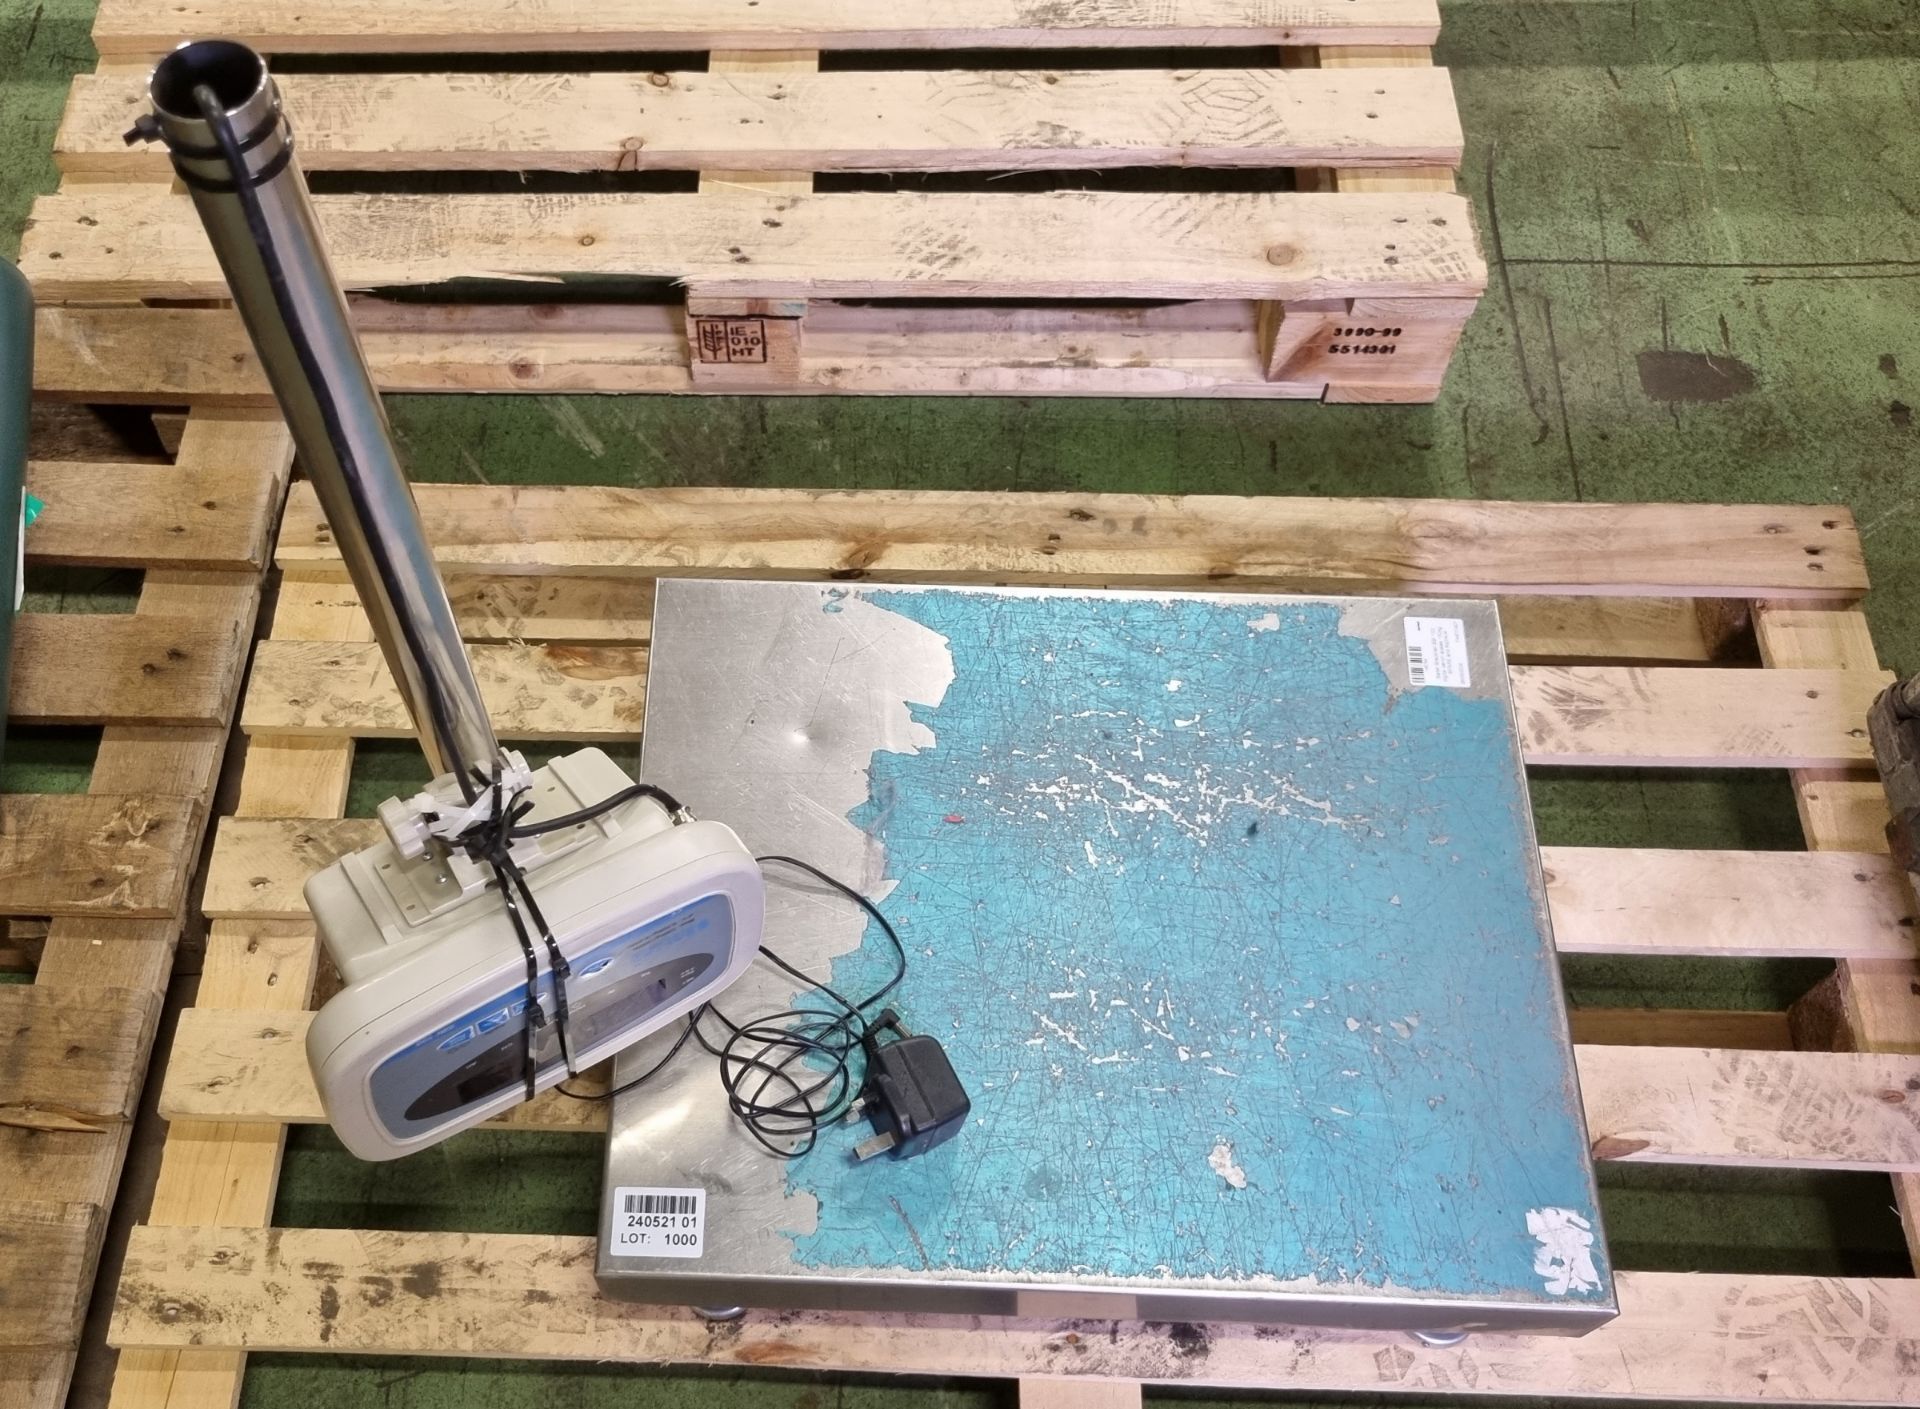 Salter Brecknell SBI 100 - digital bench scales 150kg - SPARES OR REPAIRS - Image 2 of 5